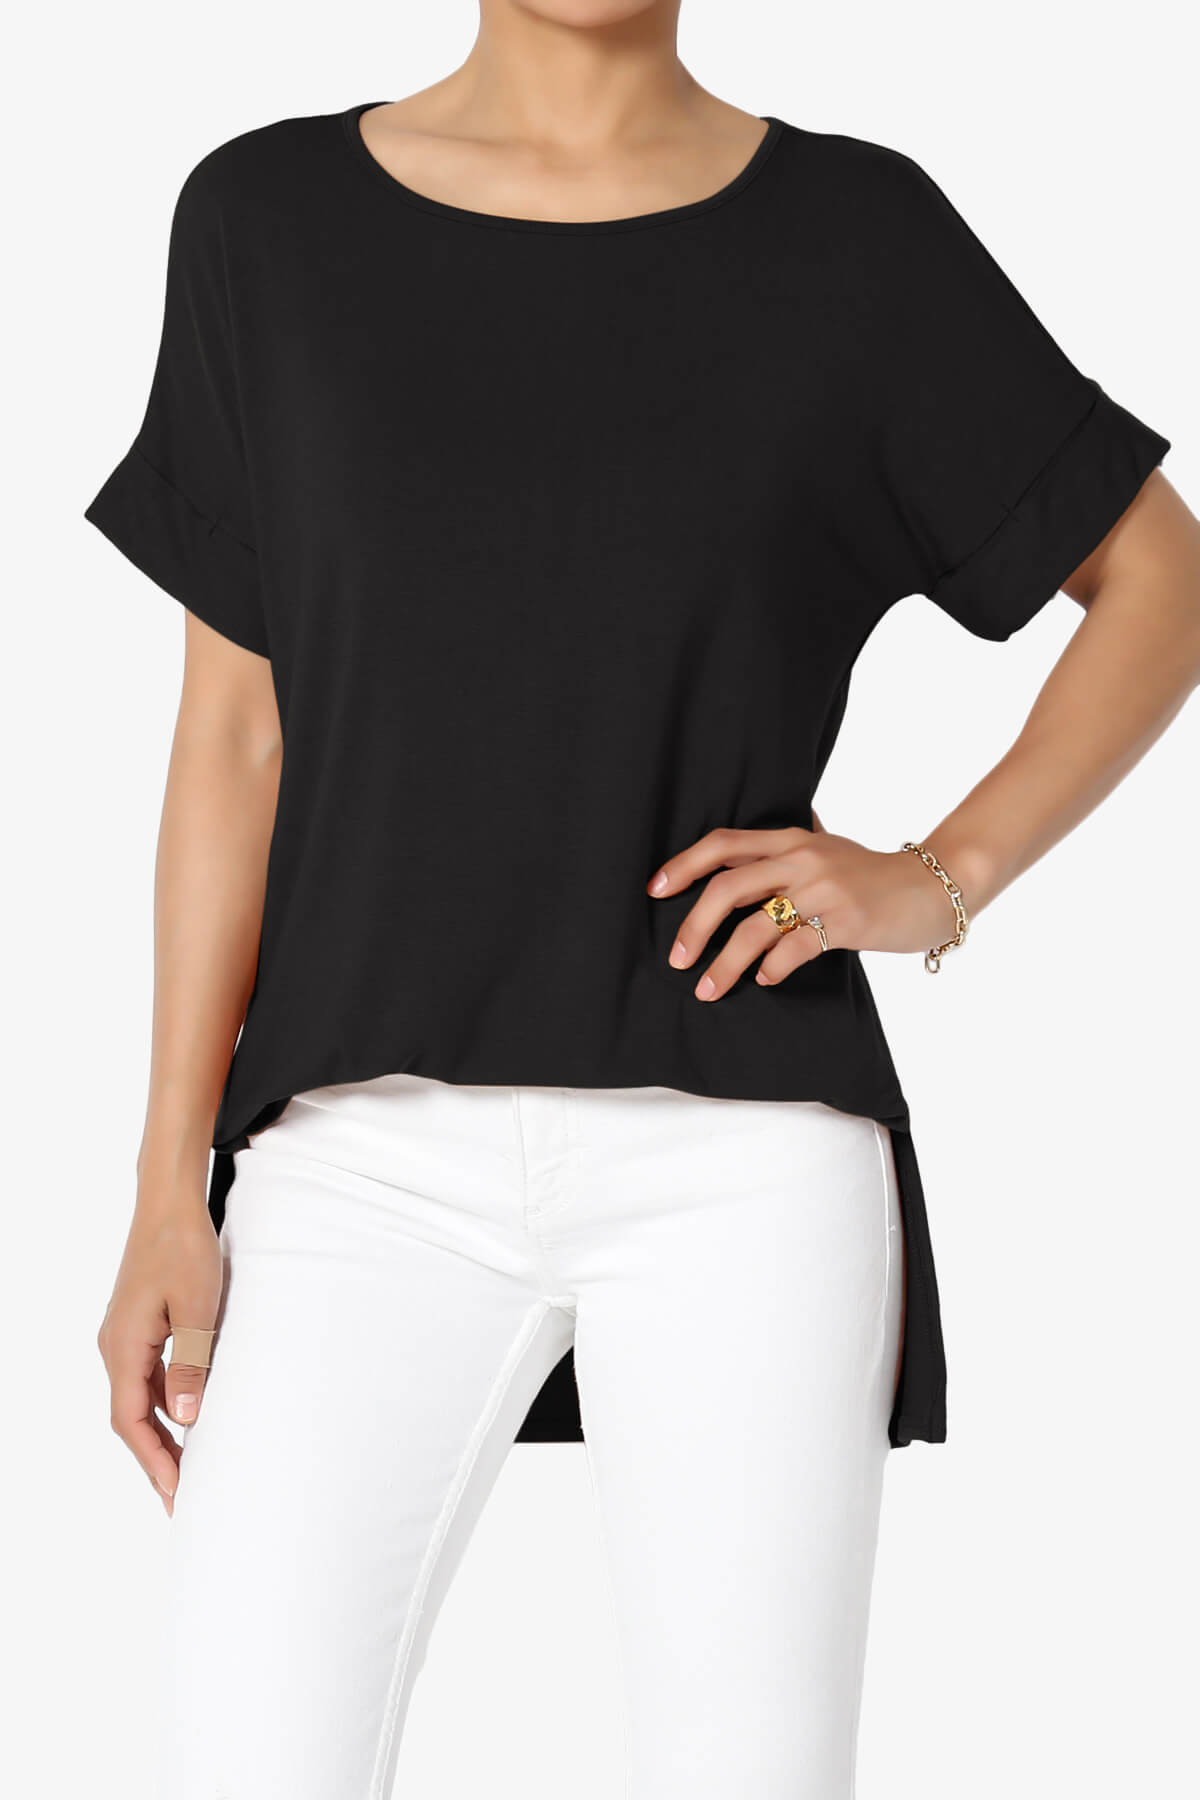 Load image into Gallery viewer, Poloma Modal Jersey Boat Neck Top BLACK_1
